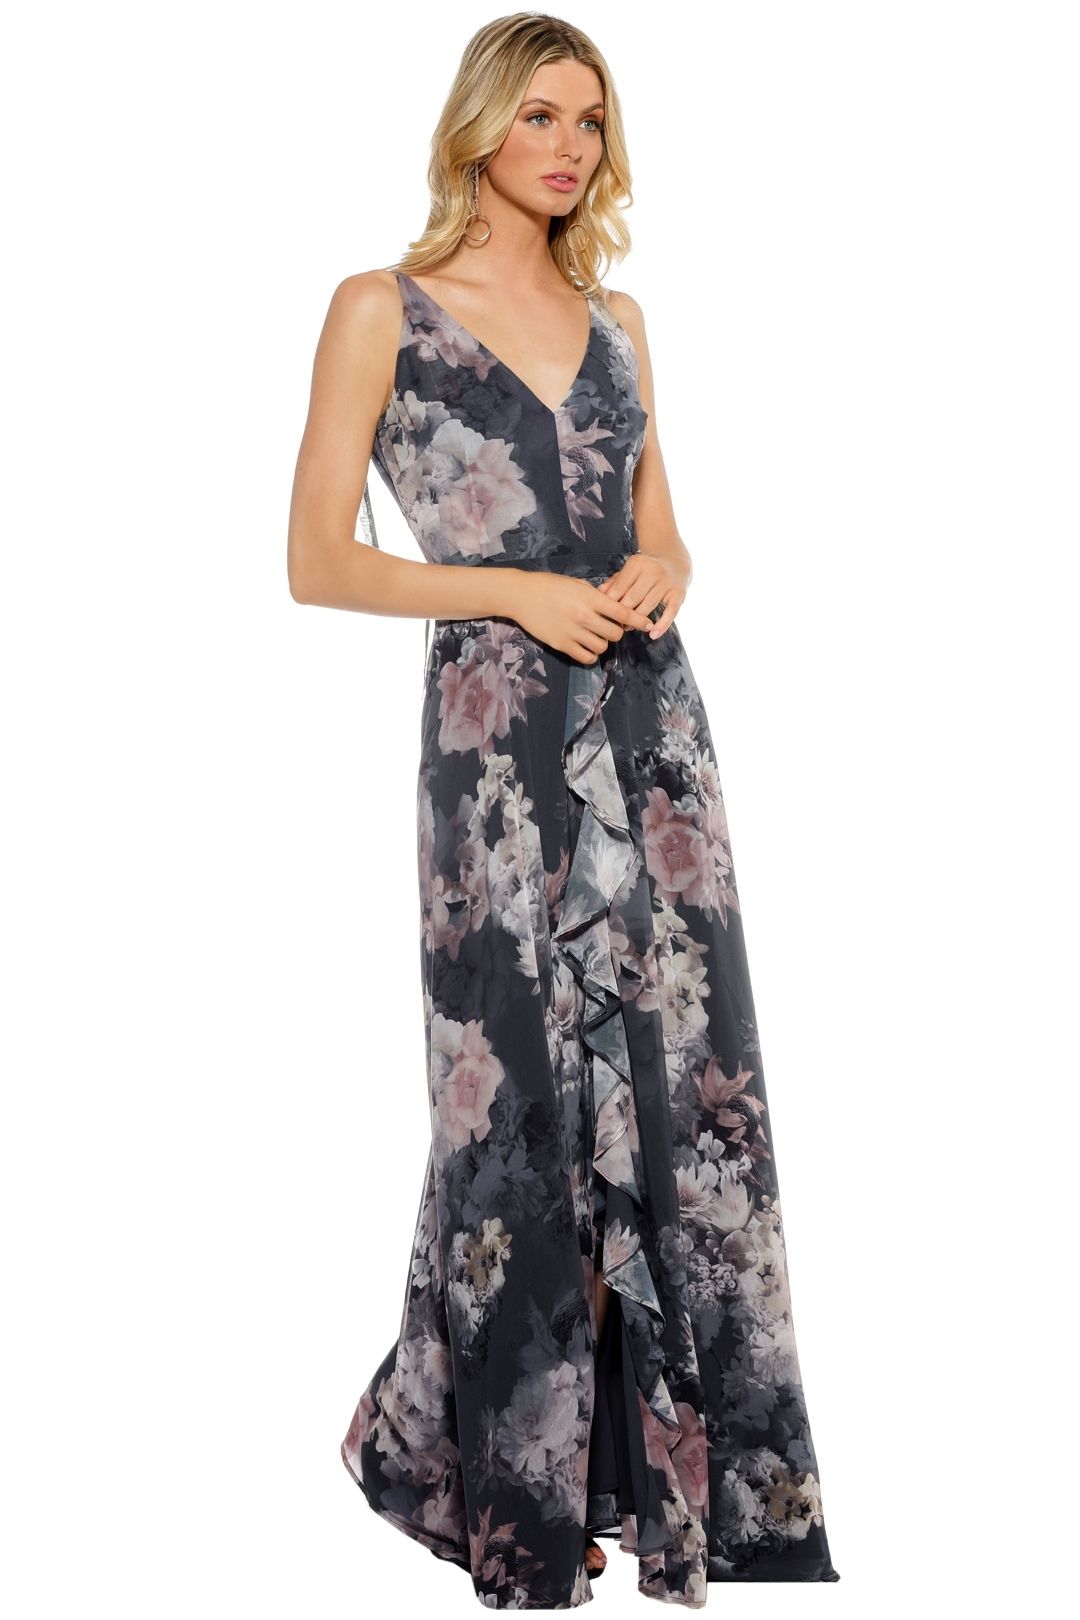 We Are Kindred - Alanah Bow Back Maxi - Floral Blue - Side